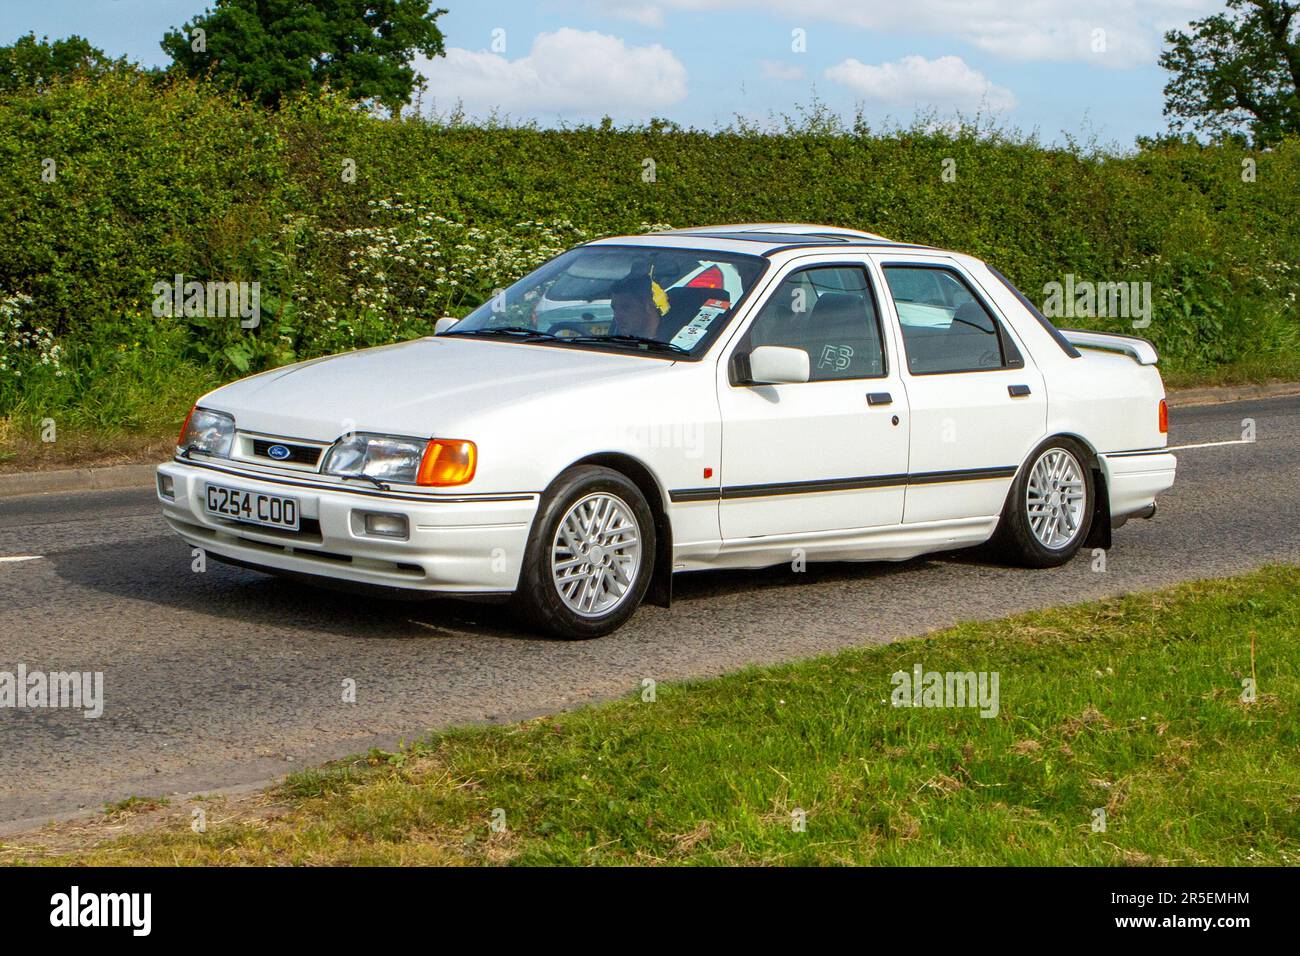 1990 90s, nineties Ford Sierra Rs Cosworth White Car Saloon Petrol 1993cc classic vintage car, Congleton, UK Stock Photo